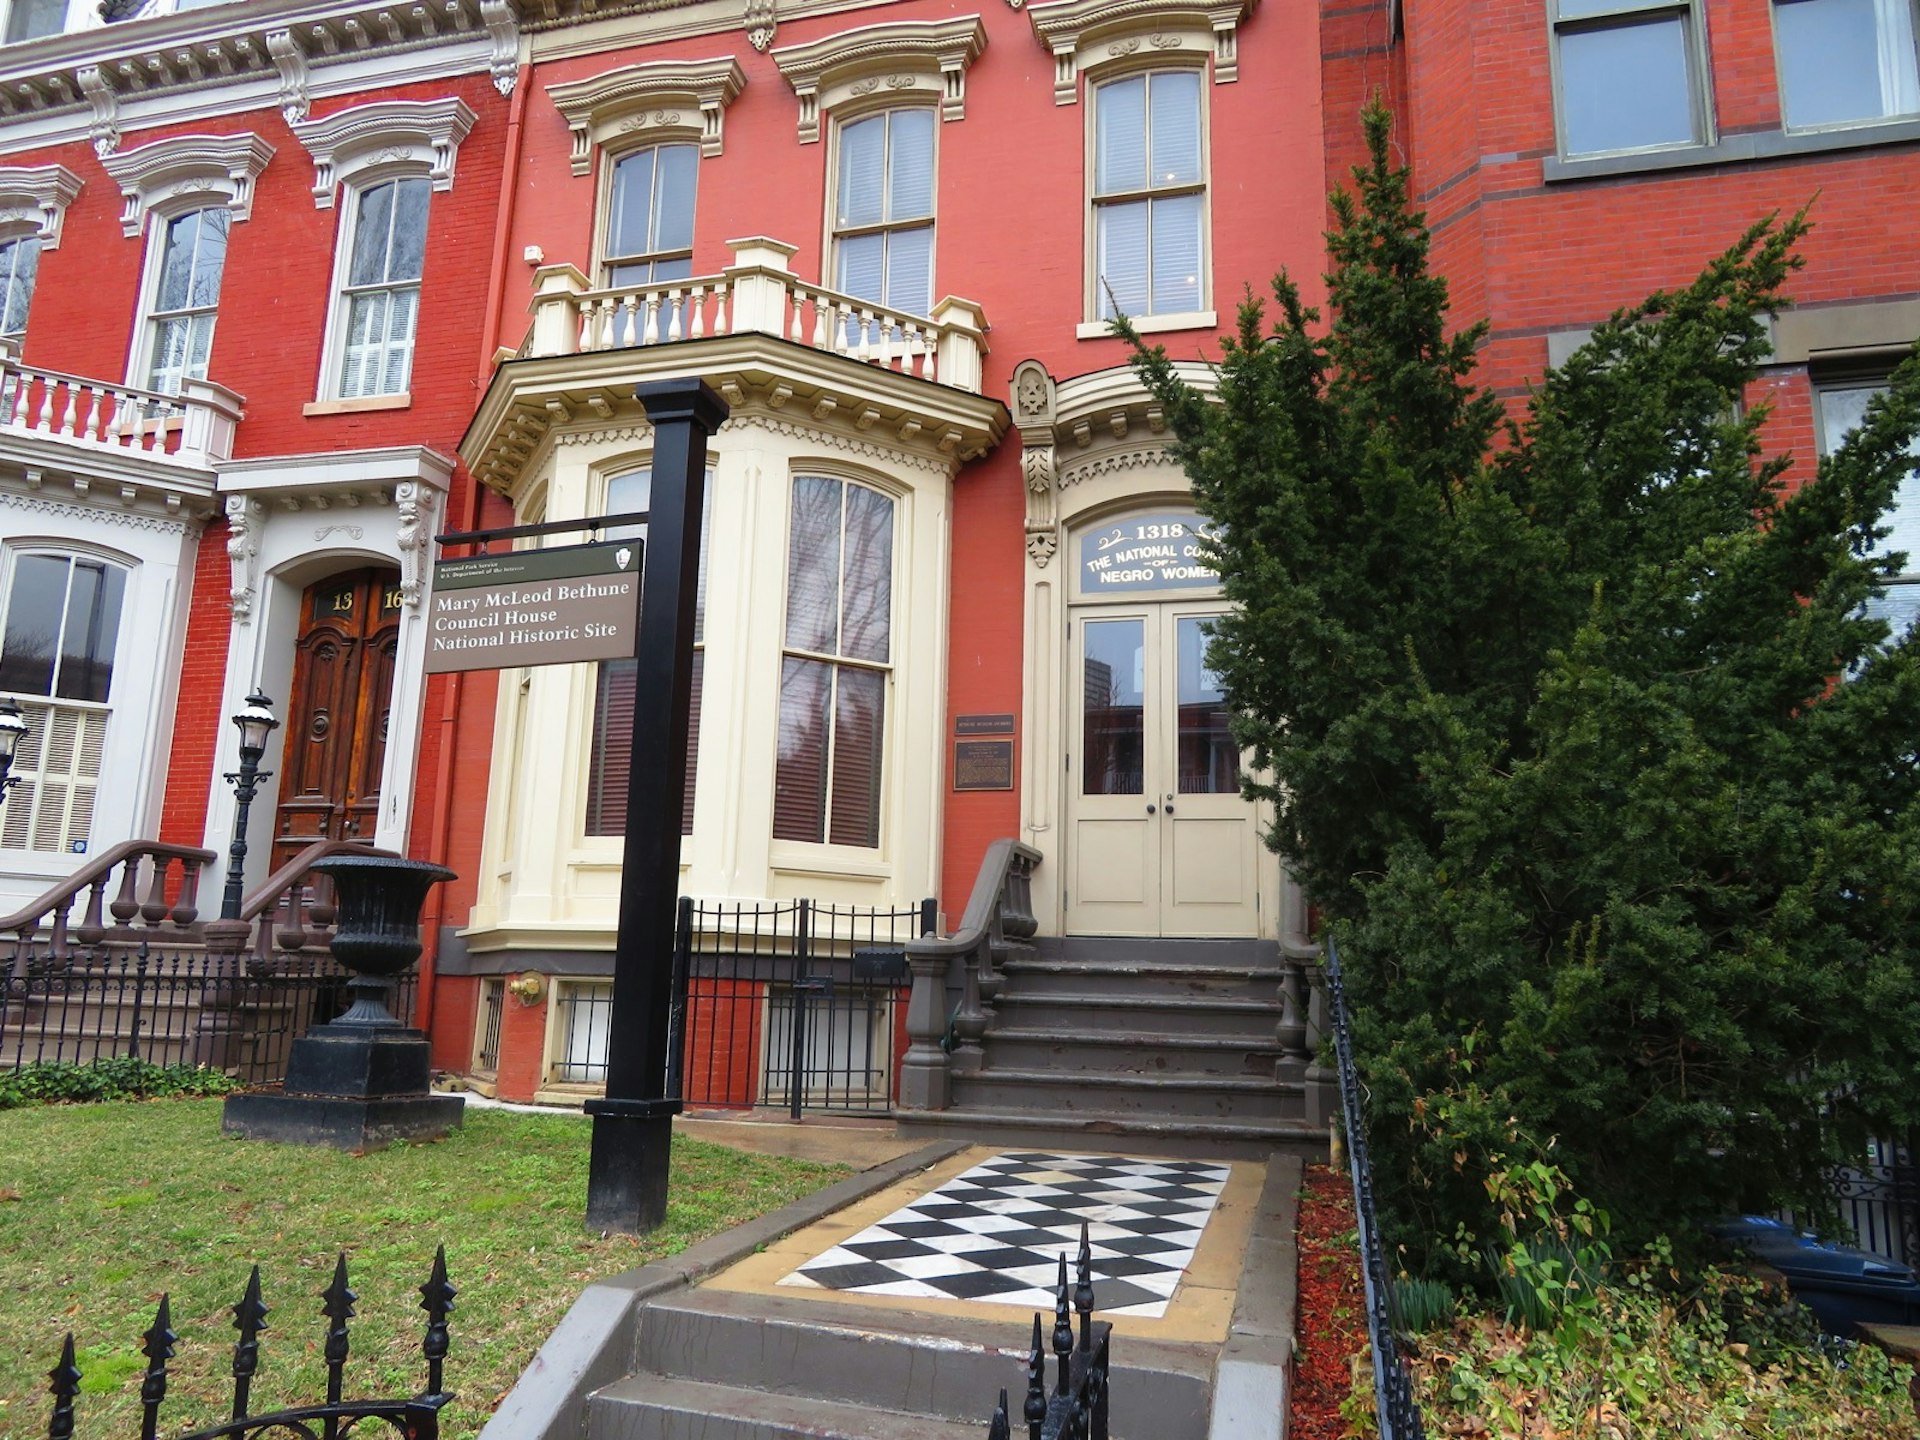 A checkerboard patterned walkway leads to a red row house with a cream-colored dormer window